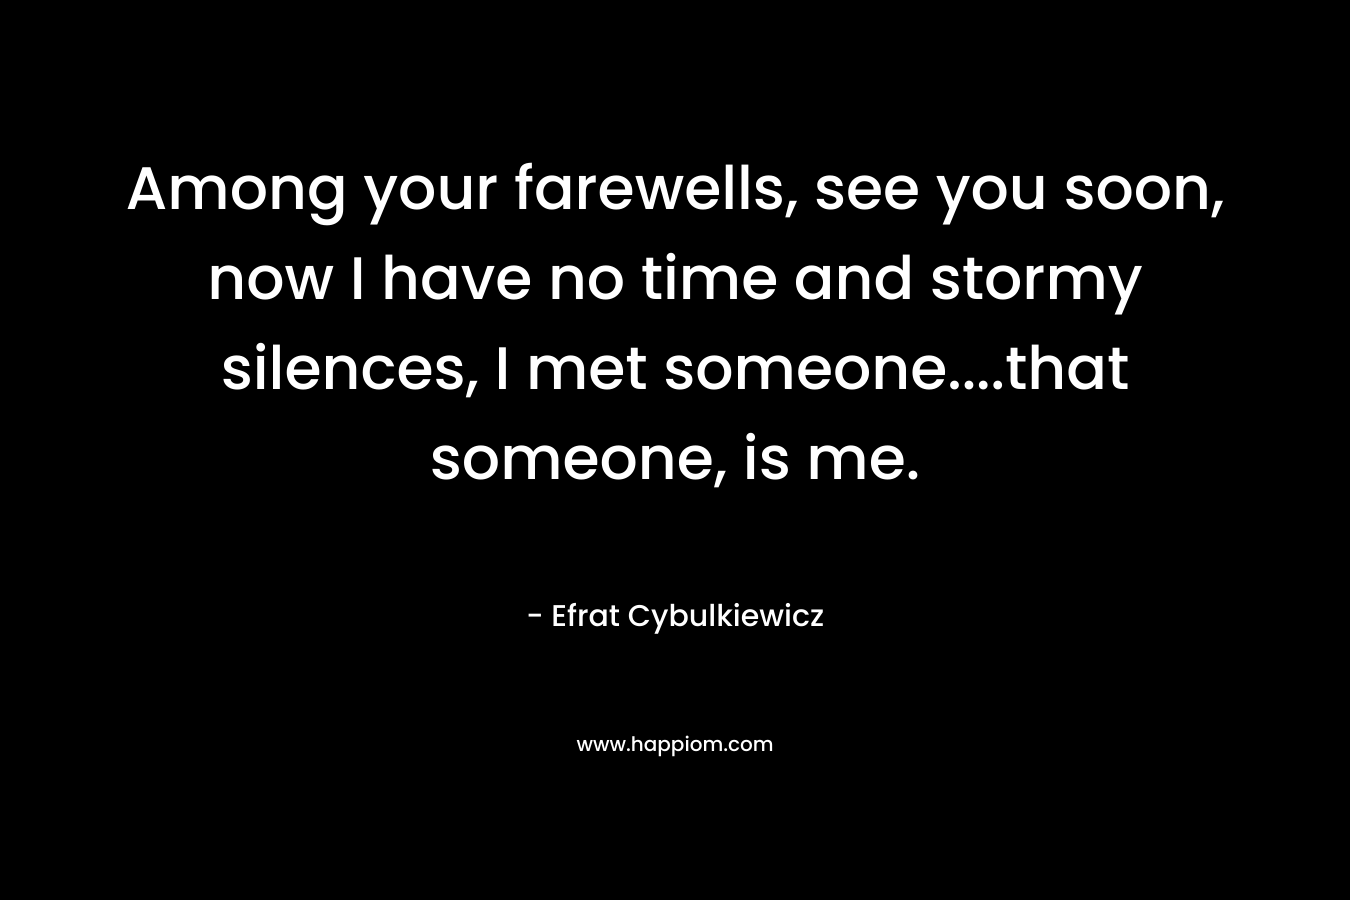 Among your farewells, see you soon, now I have no time and stormy silences, I met someone….that someone, is me. – Efrat Cybulkiewicz